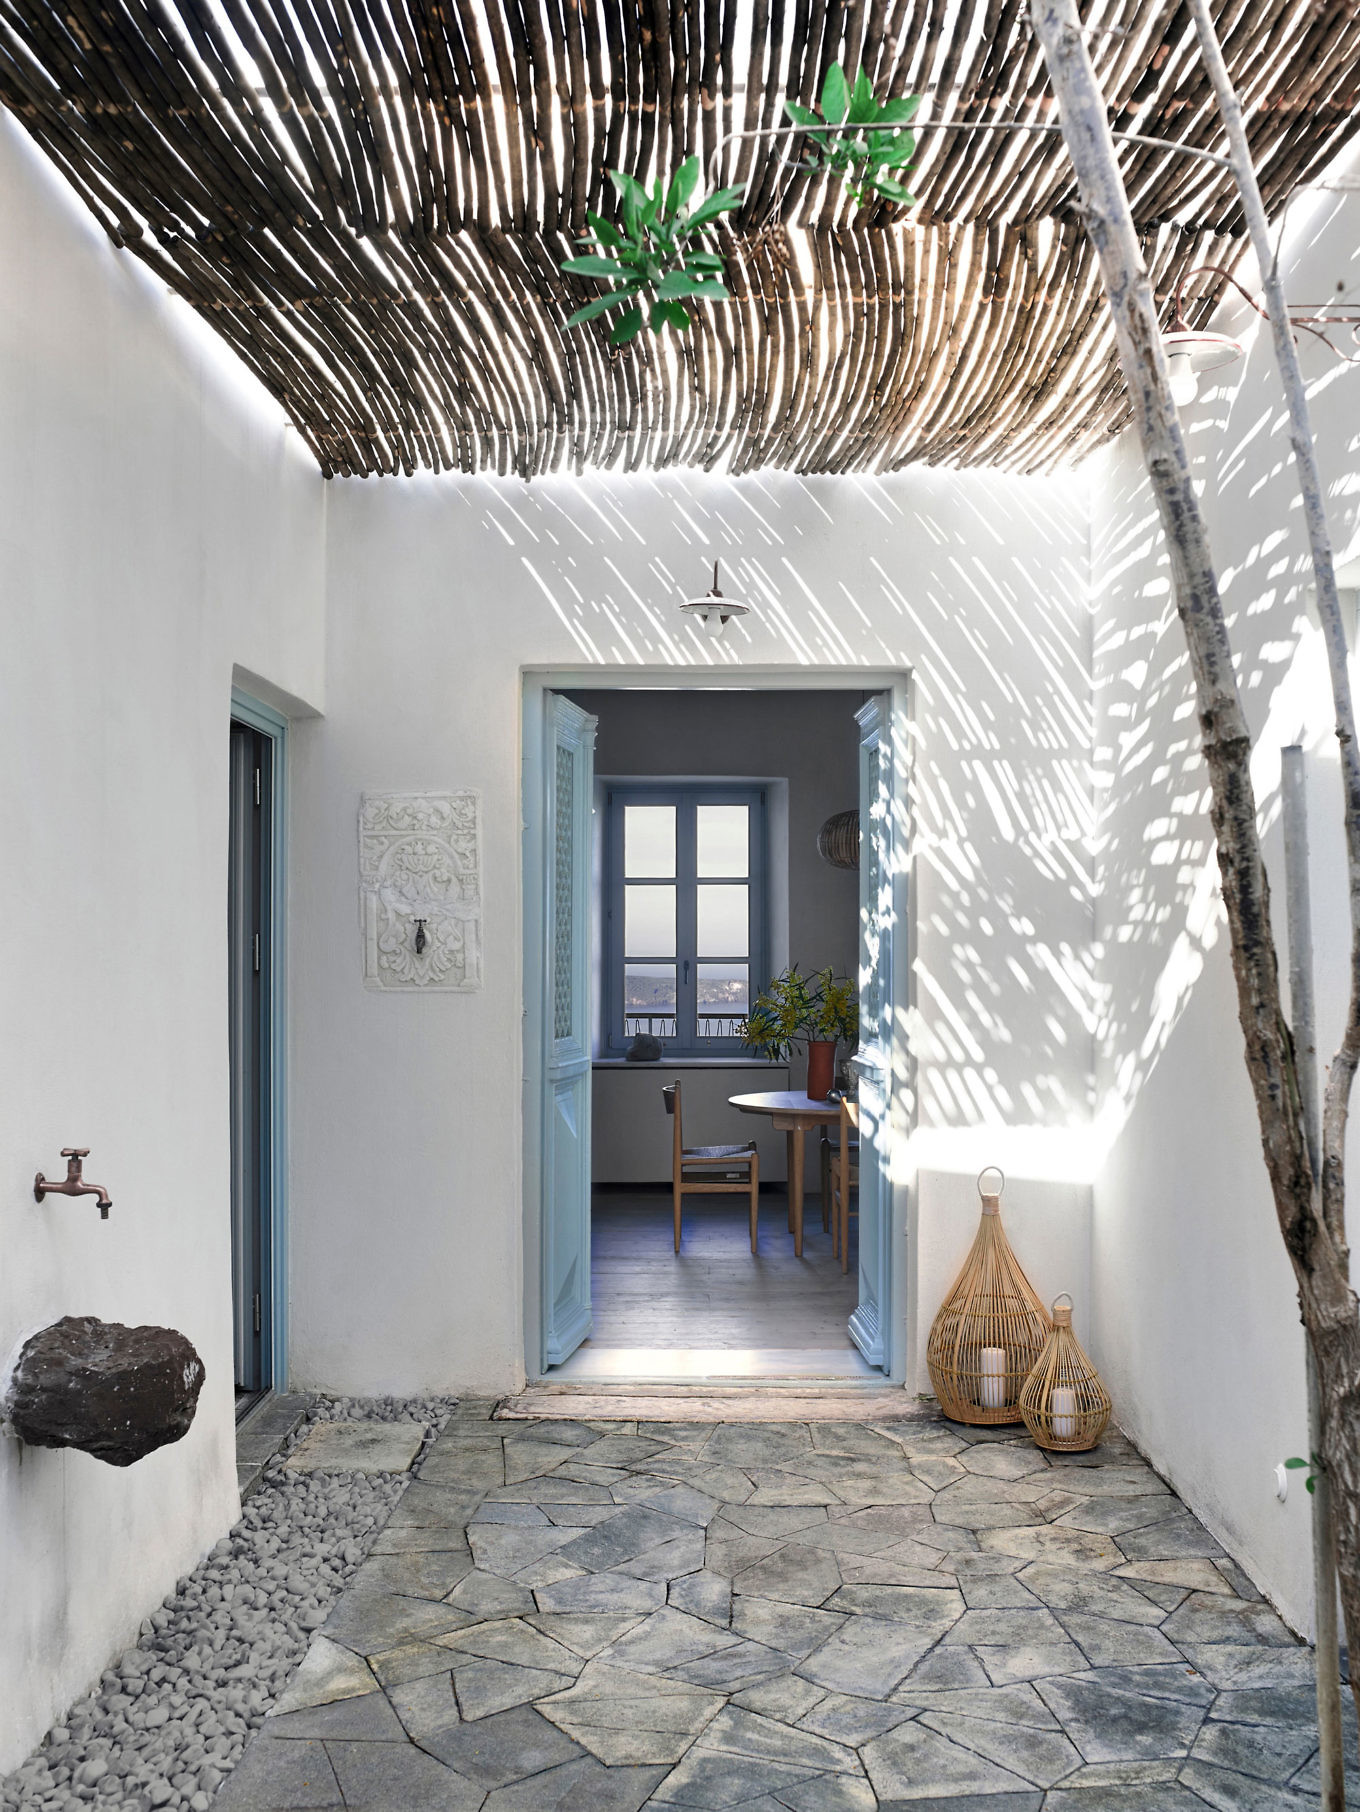 Be Amazed By This Summer House Retreat In Greece! 7